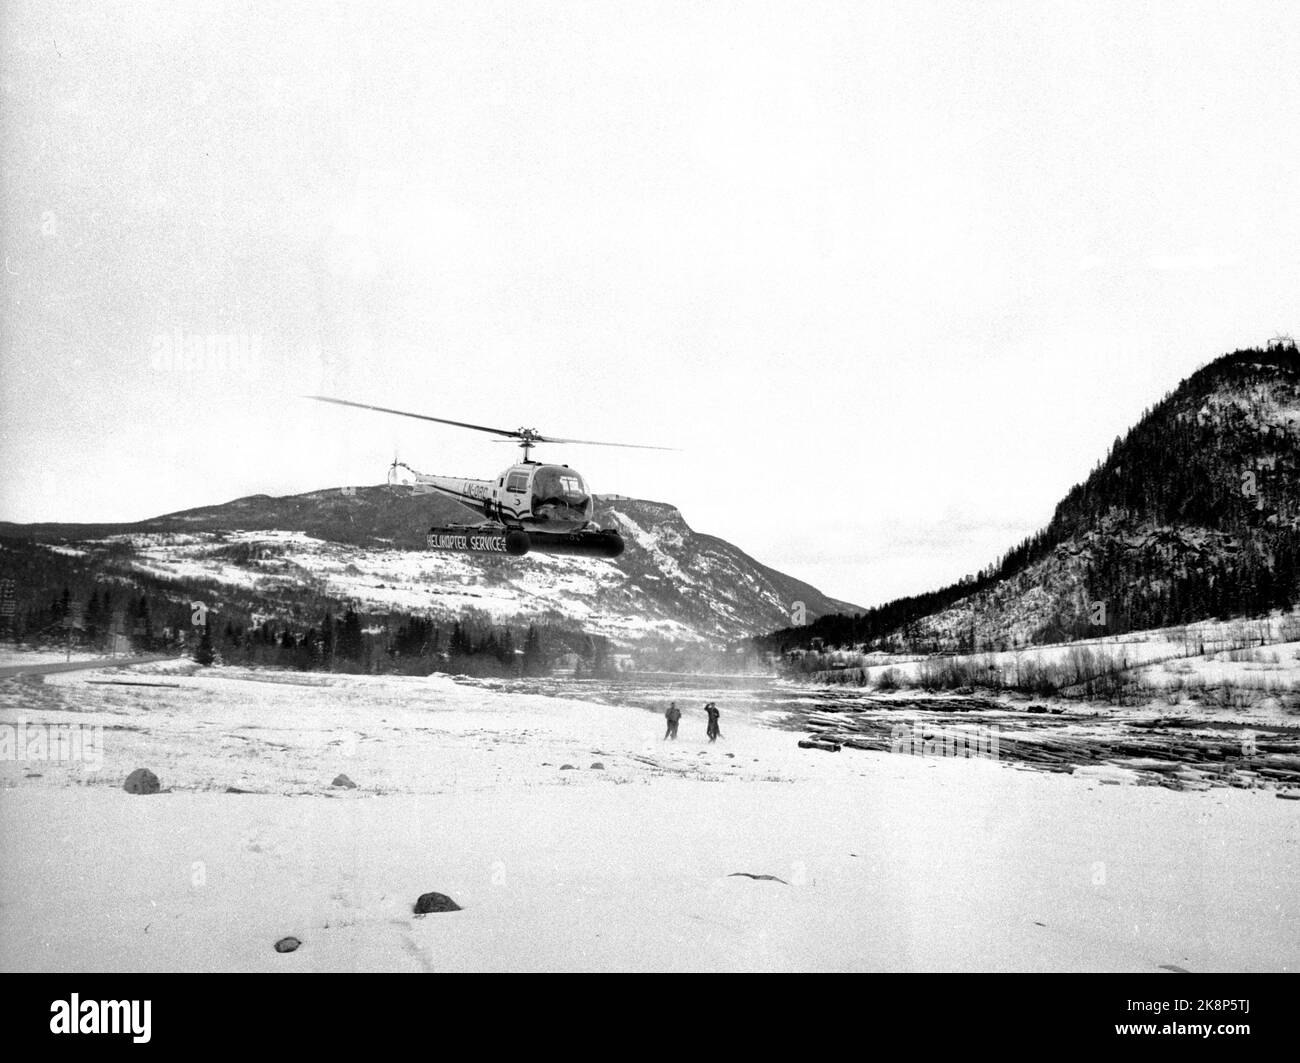 Golsfjellet, Easter 1962: Eight thousand takes care. The Red Cross is in readiness in the Easter mountain. When the alarm goes off, the Red Cross can call dog leader, ambulances, aircraft and helicopters. Here is a helicopter from helicopter service in action. Photo: Bjørn Bjørnsen / Current / NTBSCANPIX. Stock Photo